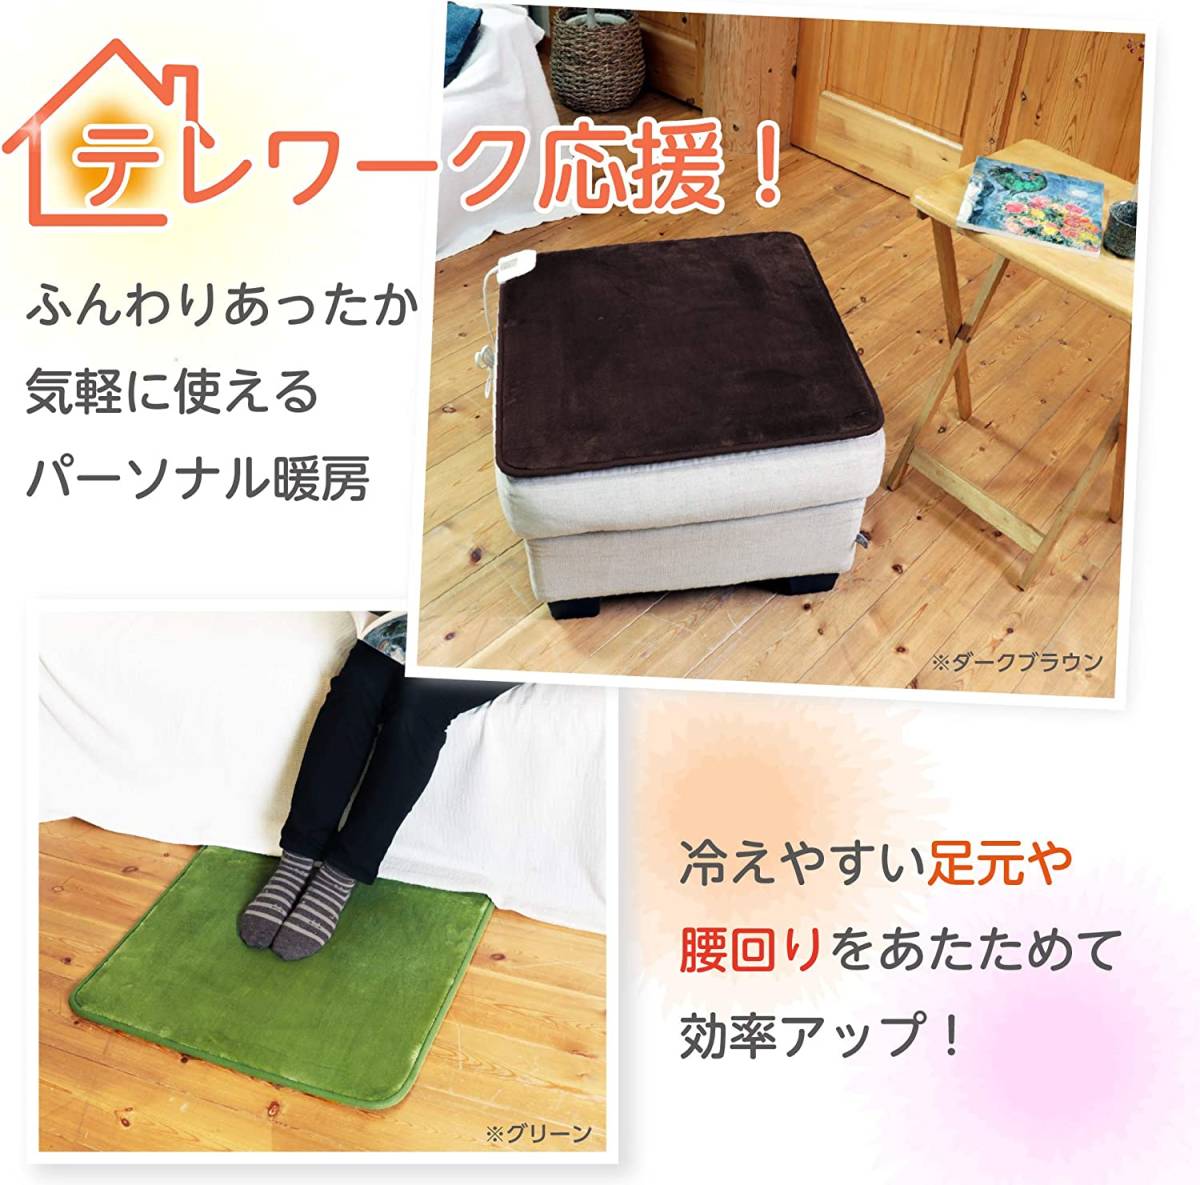  new goods [ life Joy ] electric mat 60cm×60cm flannel .... electric carpet electric home heater 2020 year of model 